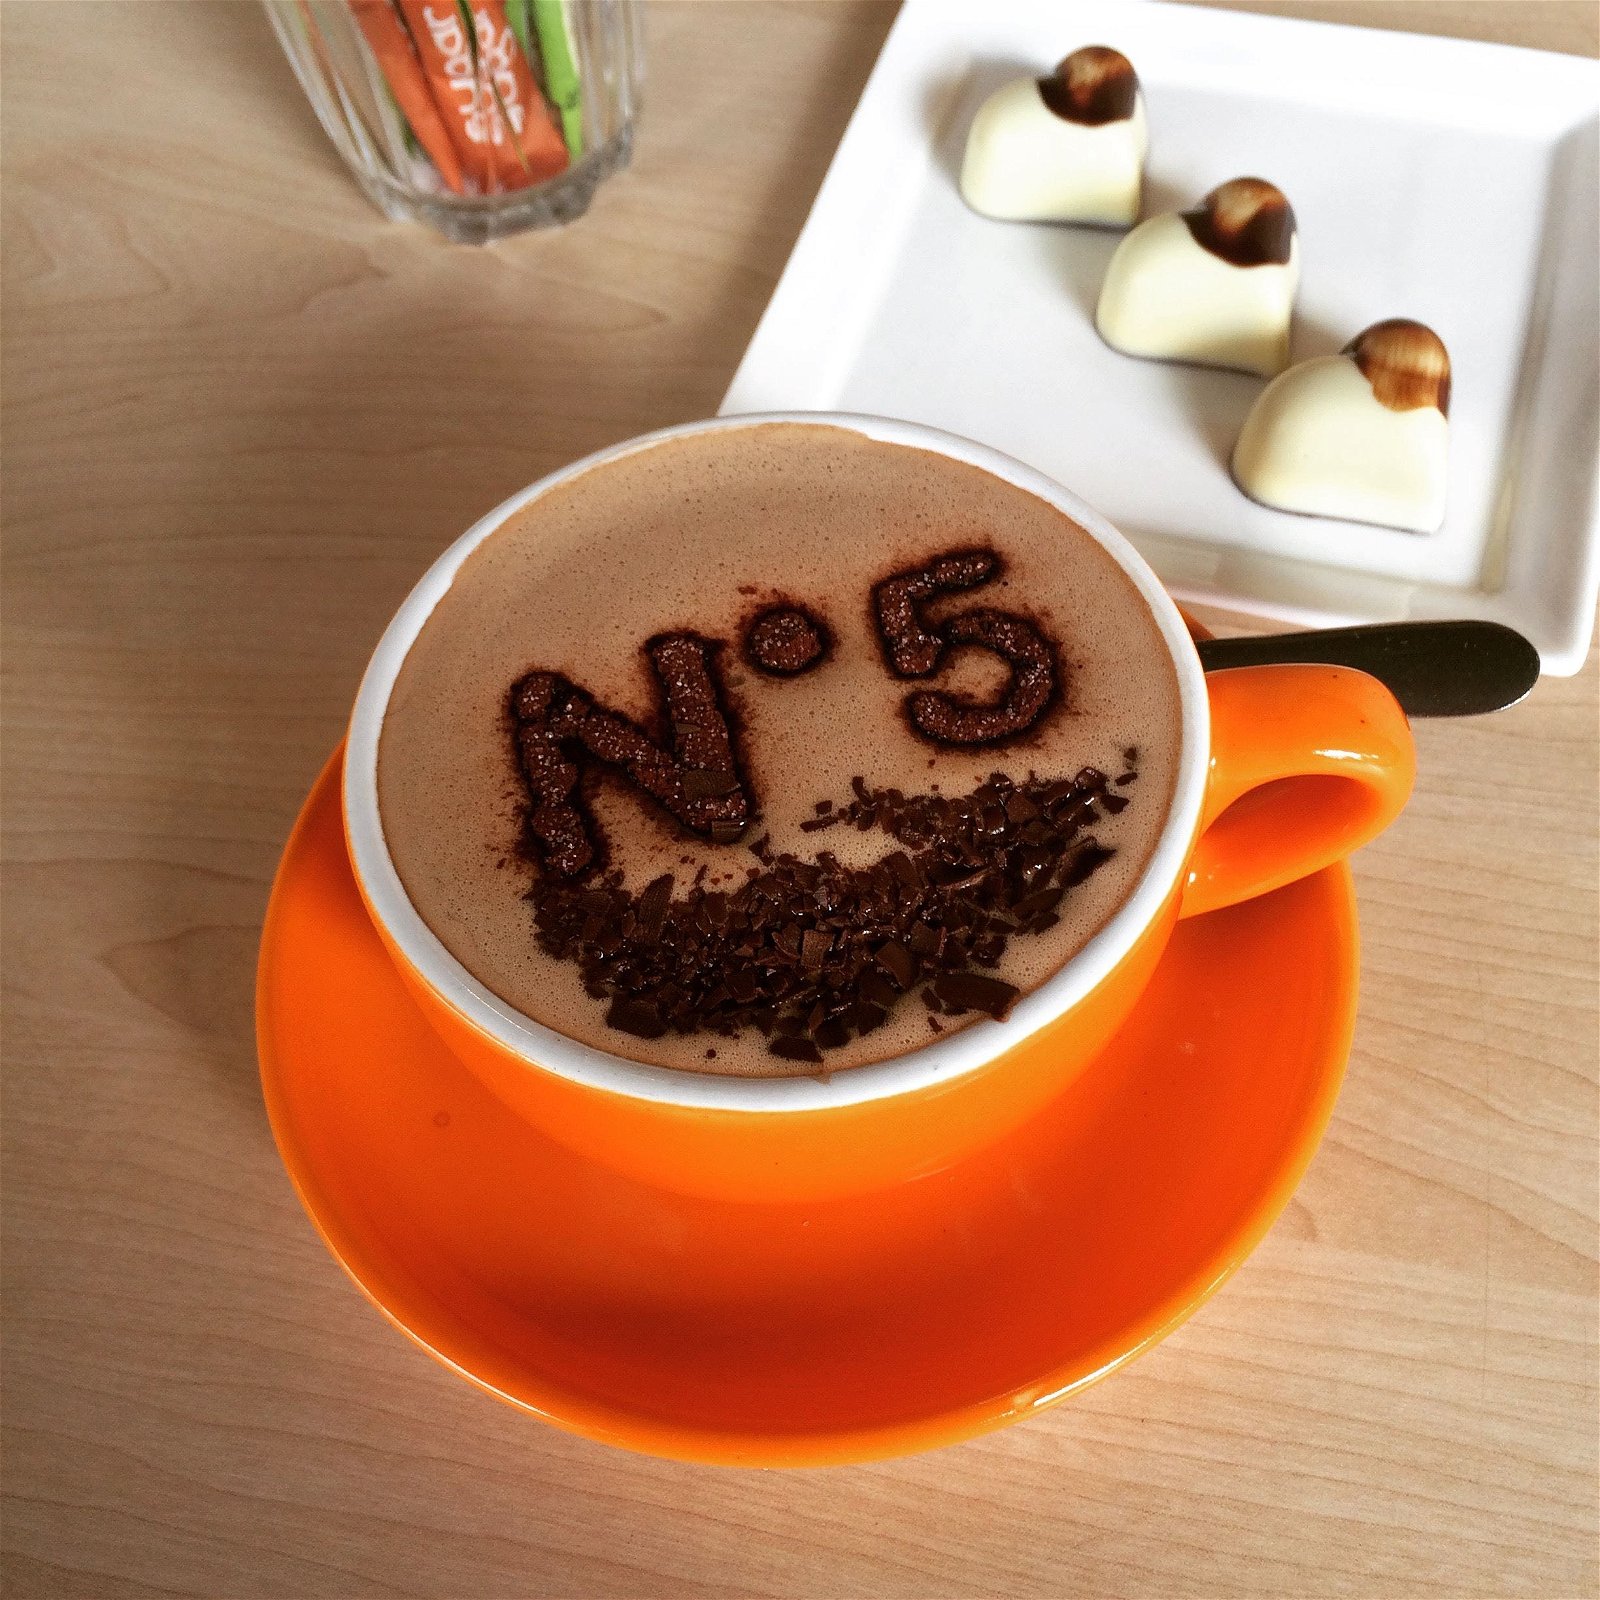 Chocolate @ No 5 - Accommodation Bookings 1